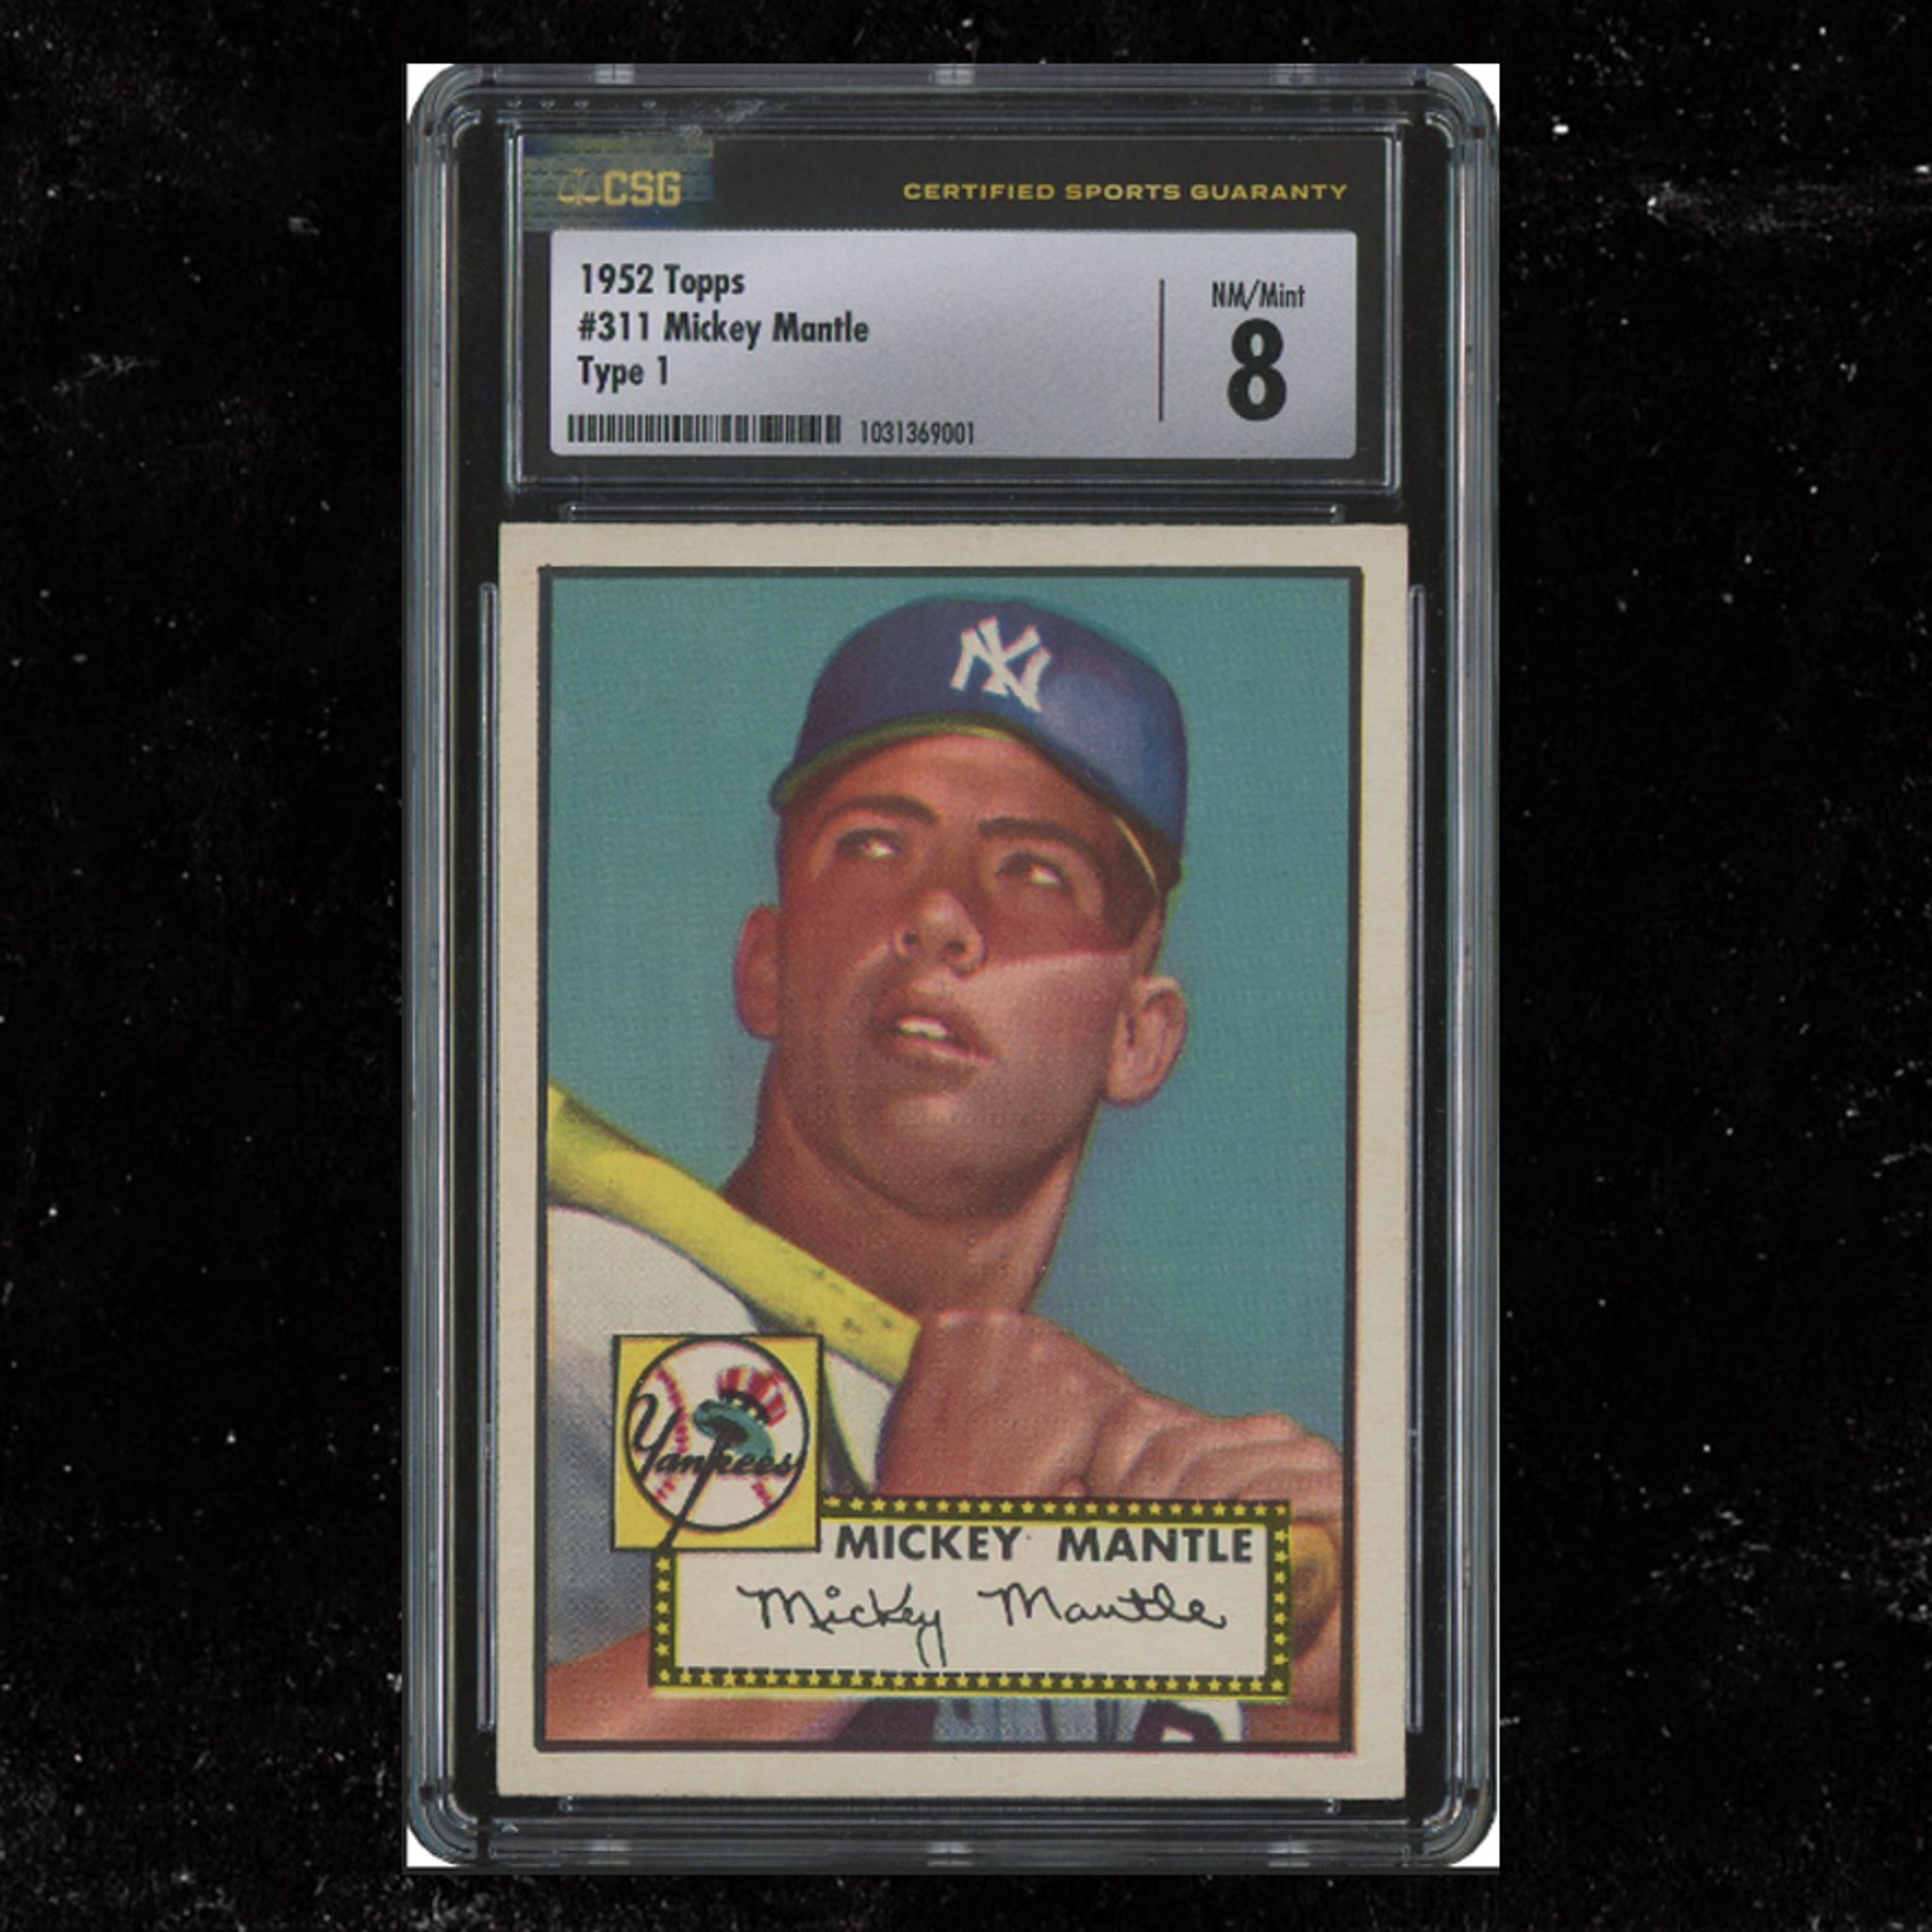 Mickey Mantle '52 Topps #311 Card Up For Auction, Expected To Fetch $1.5 Mil